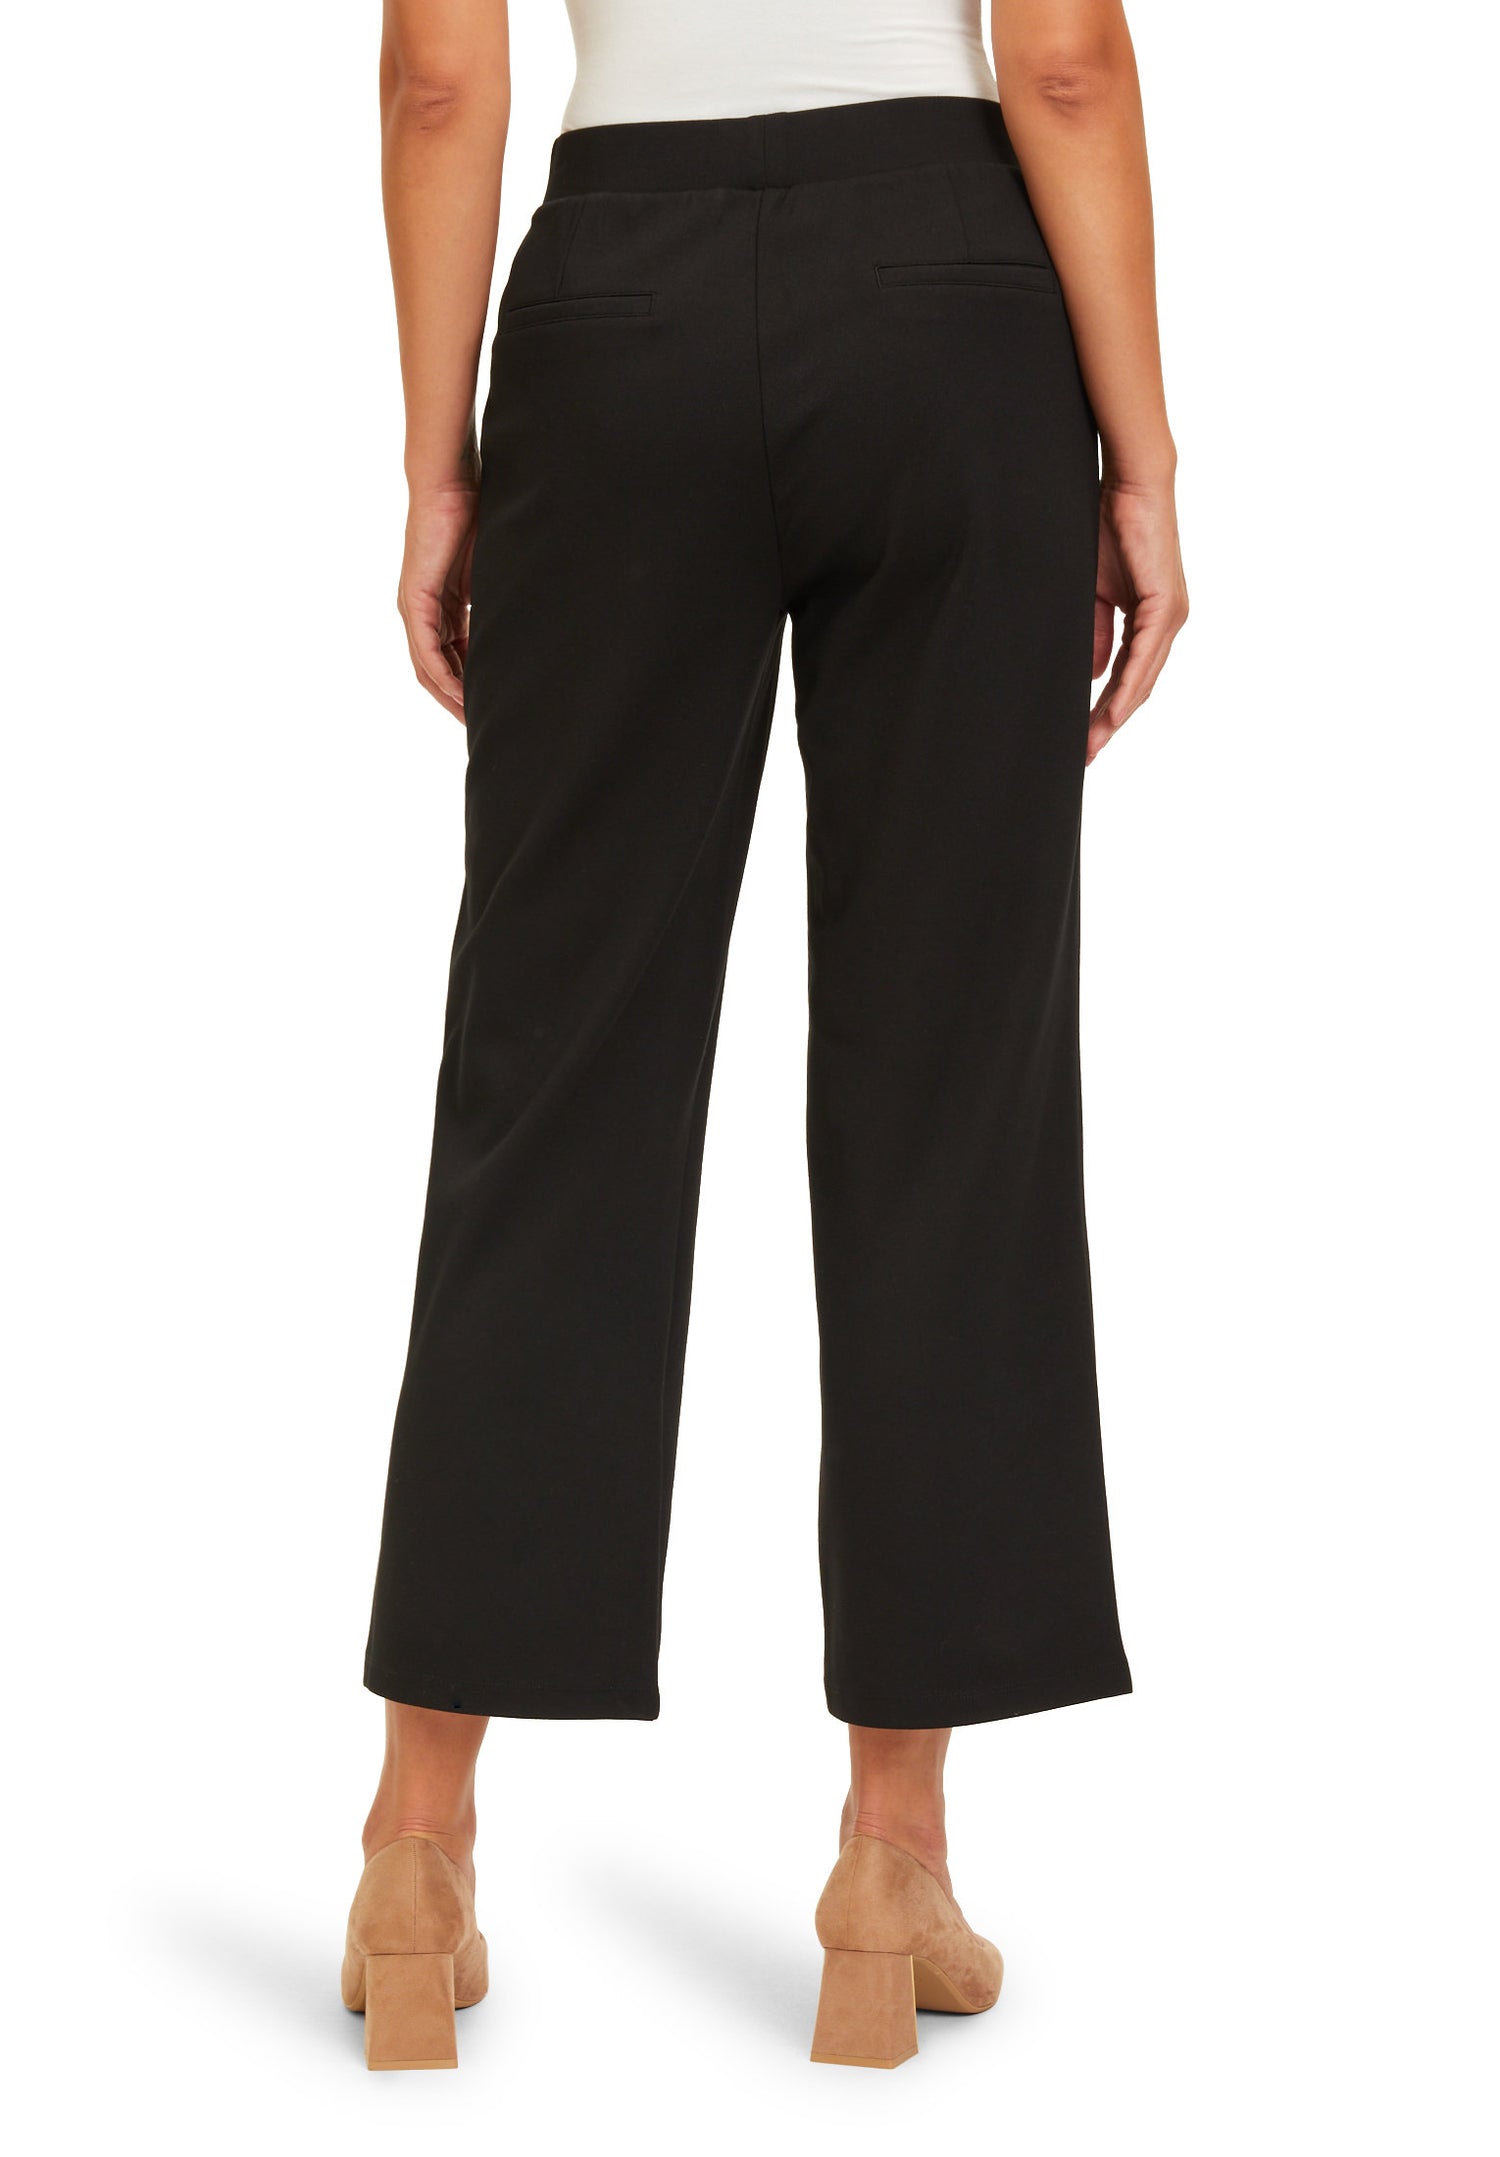 Black Cropped Slip On Trousers_6822-2250_9045_04